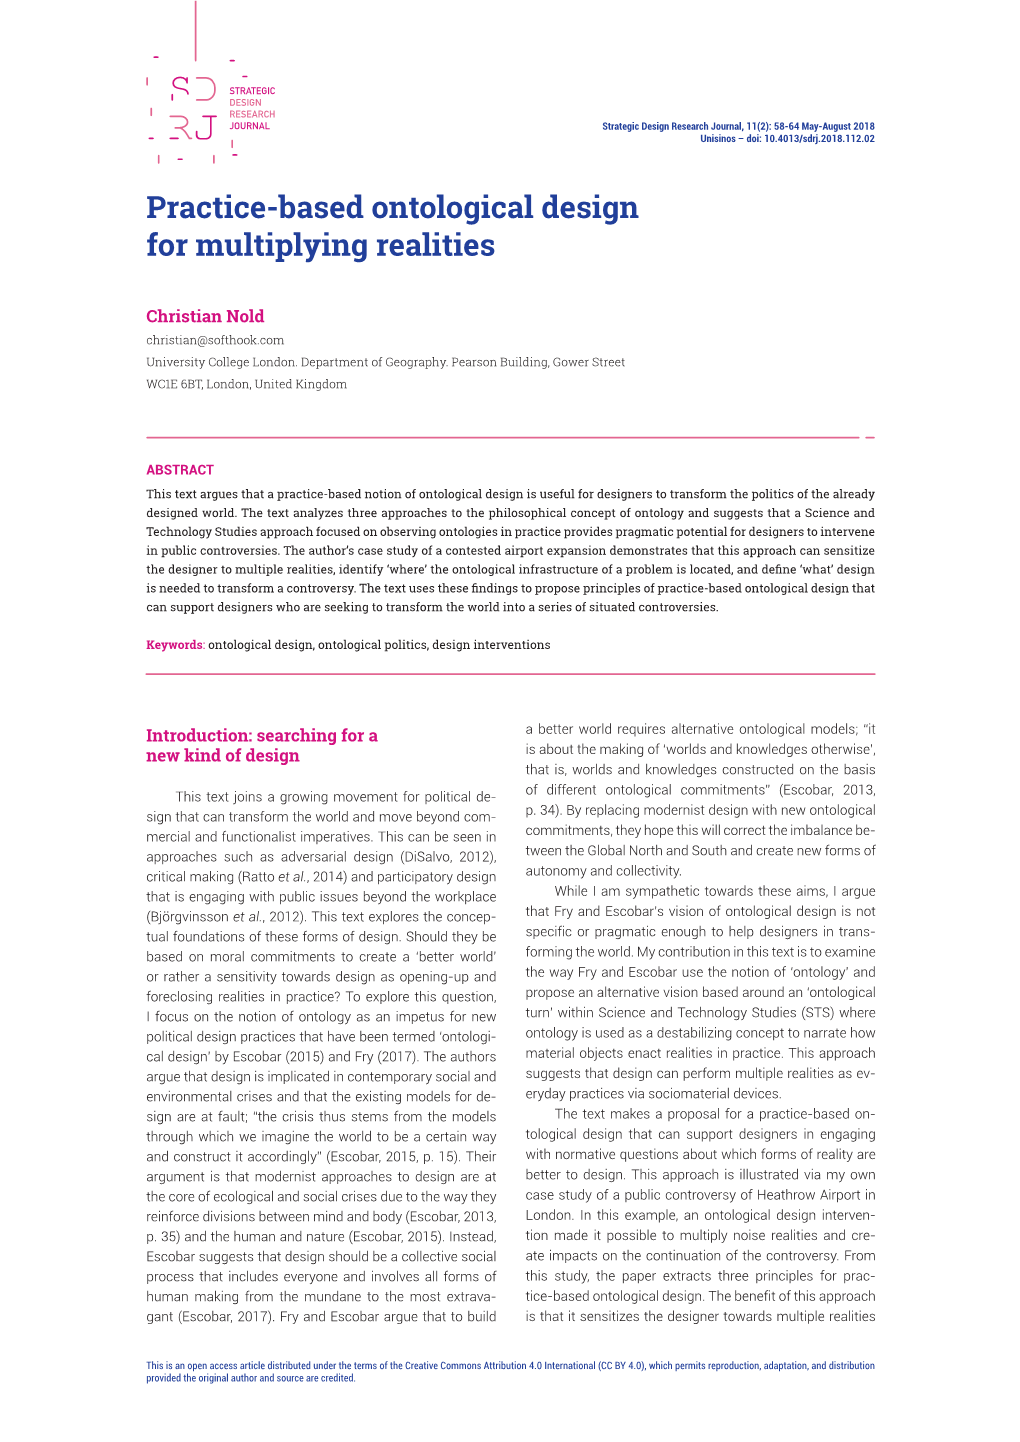 Practice-Based Ontological Design for Multiplying Realities